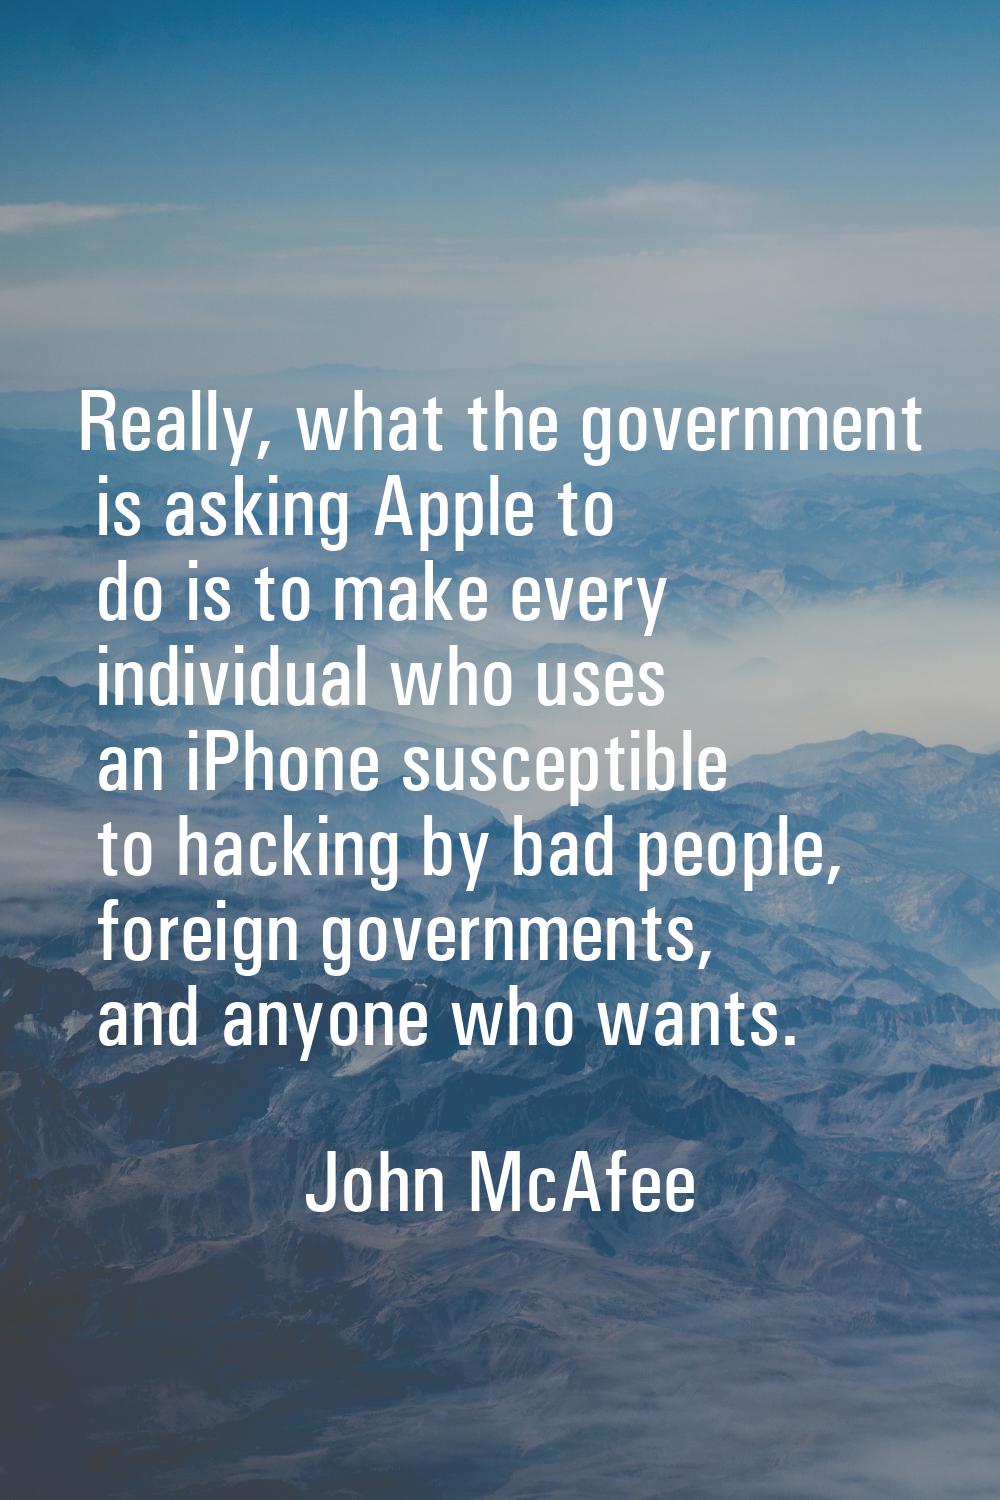 Really, what the government is asking Apple to do is to make every individual who uses an iPhone su